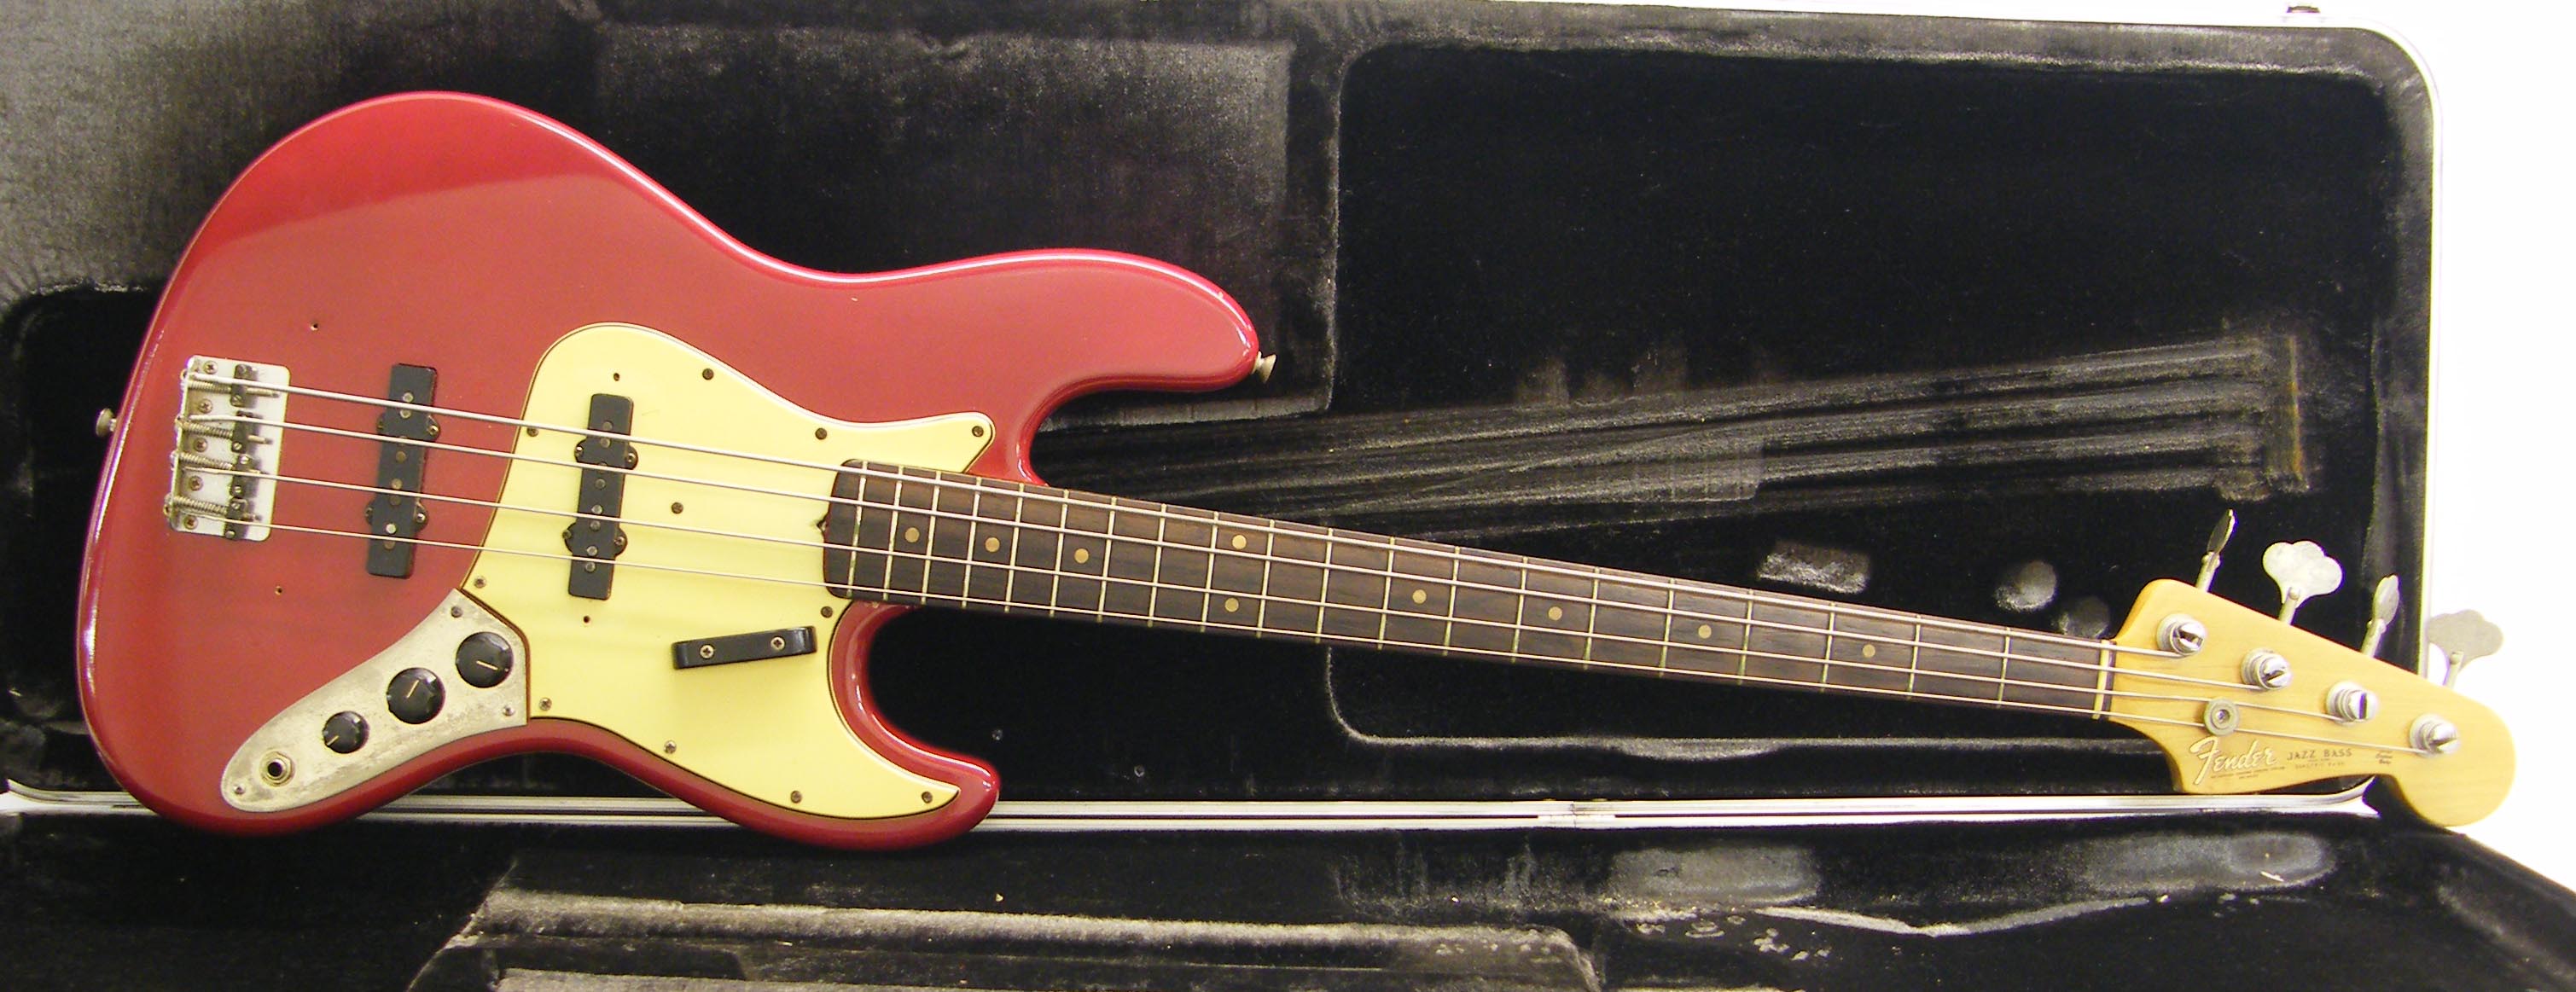 1964 Fender Jazz Bass electric bass guitar, made in USA, ser. no. L21548, red re-finish with various